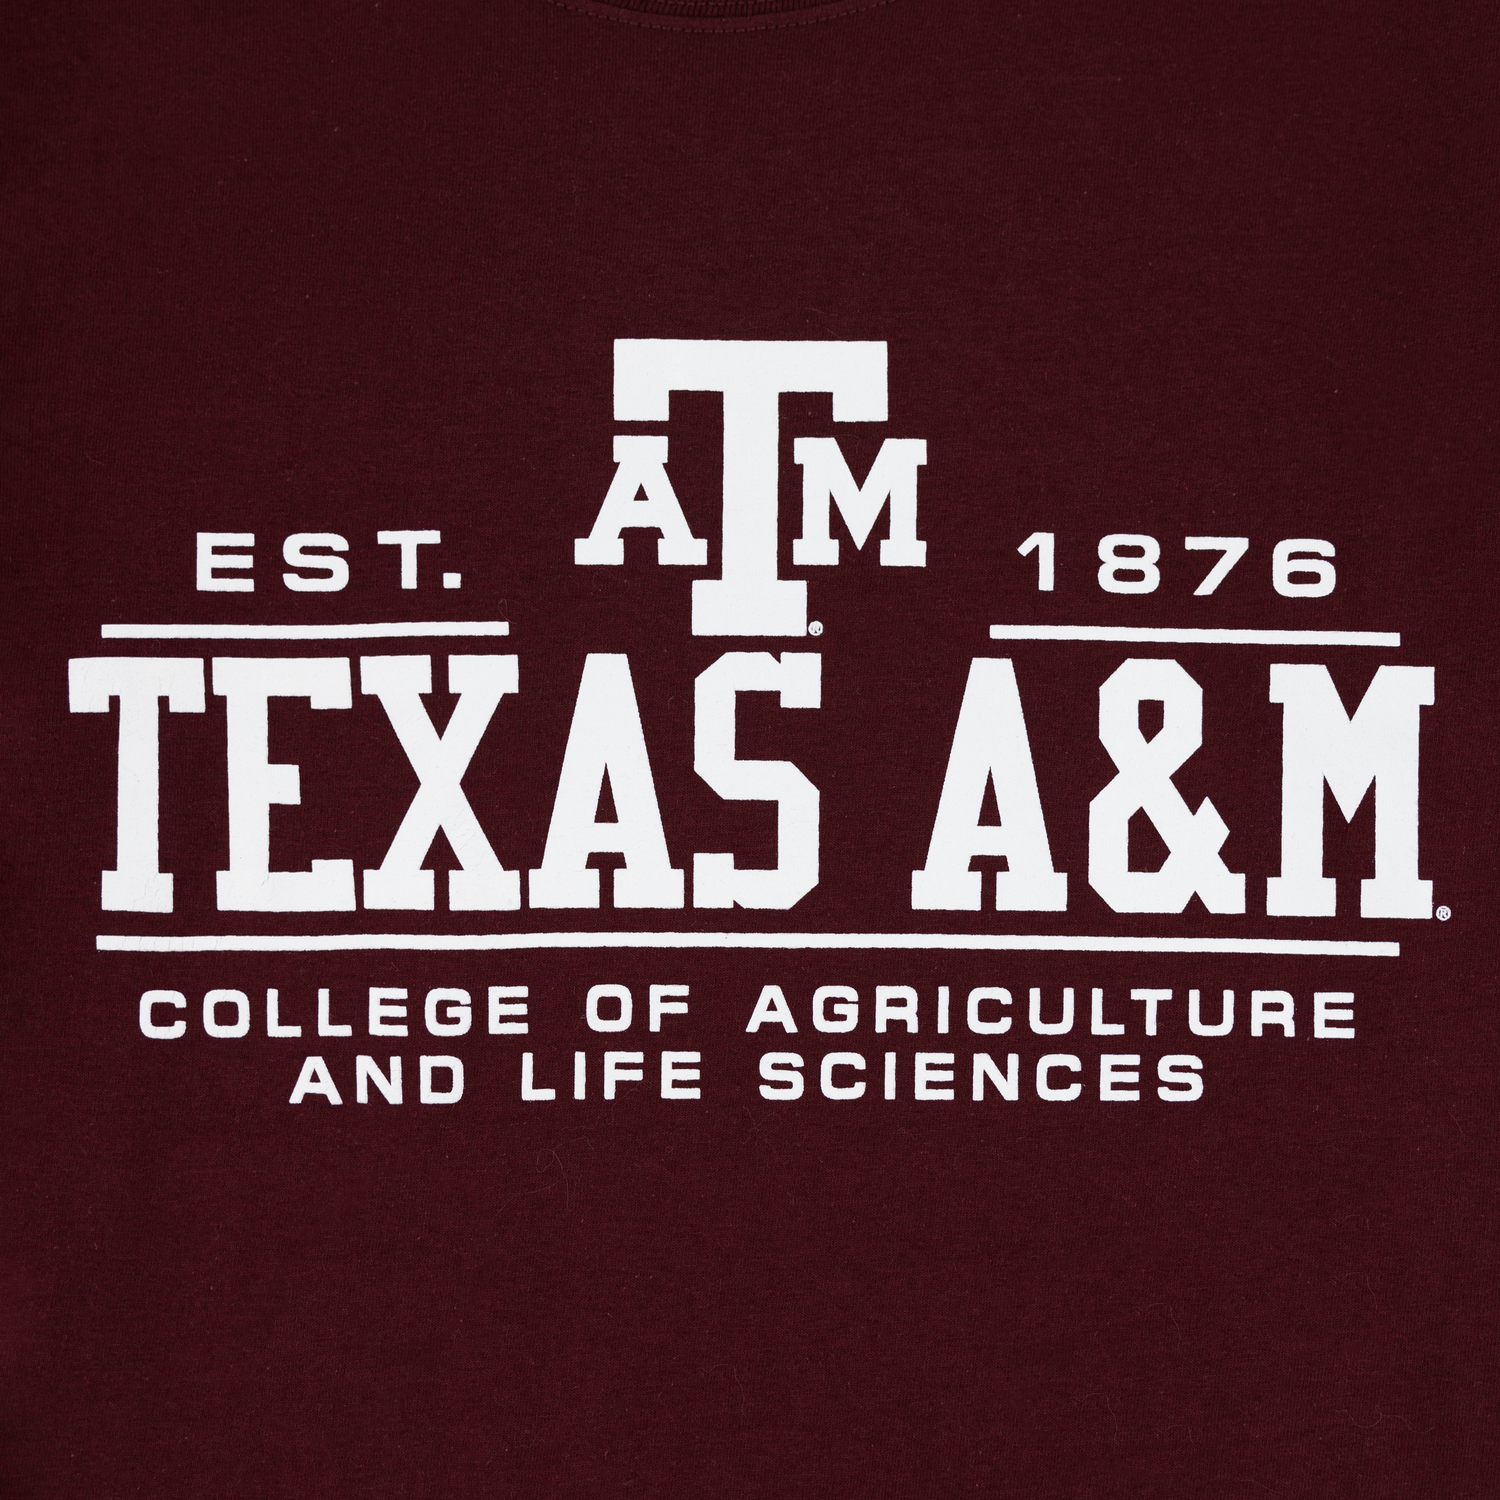 Texas A&M College of Agriculture and Life Sciences T-Shirt